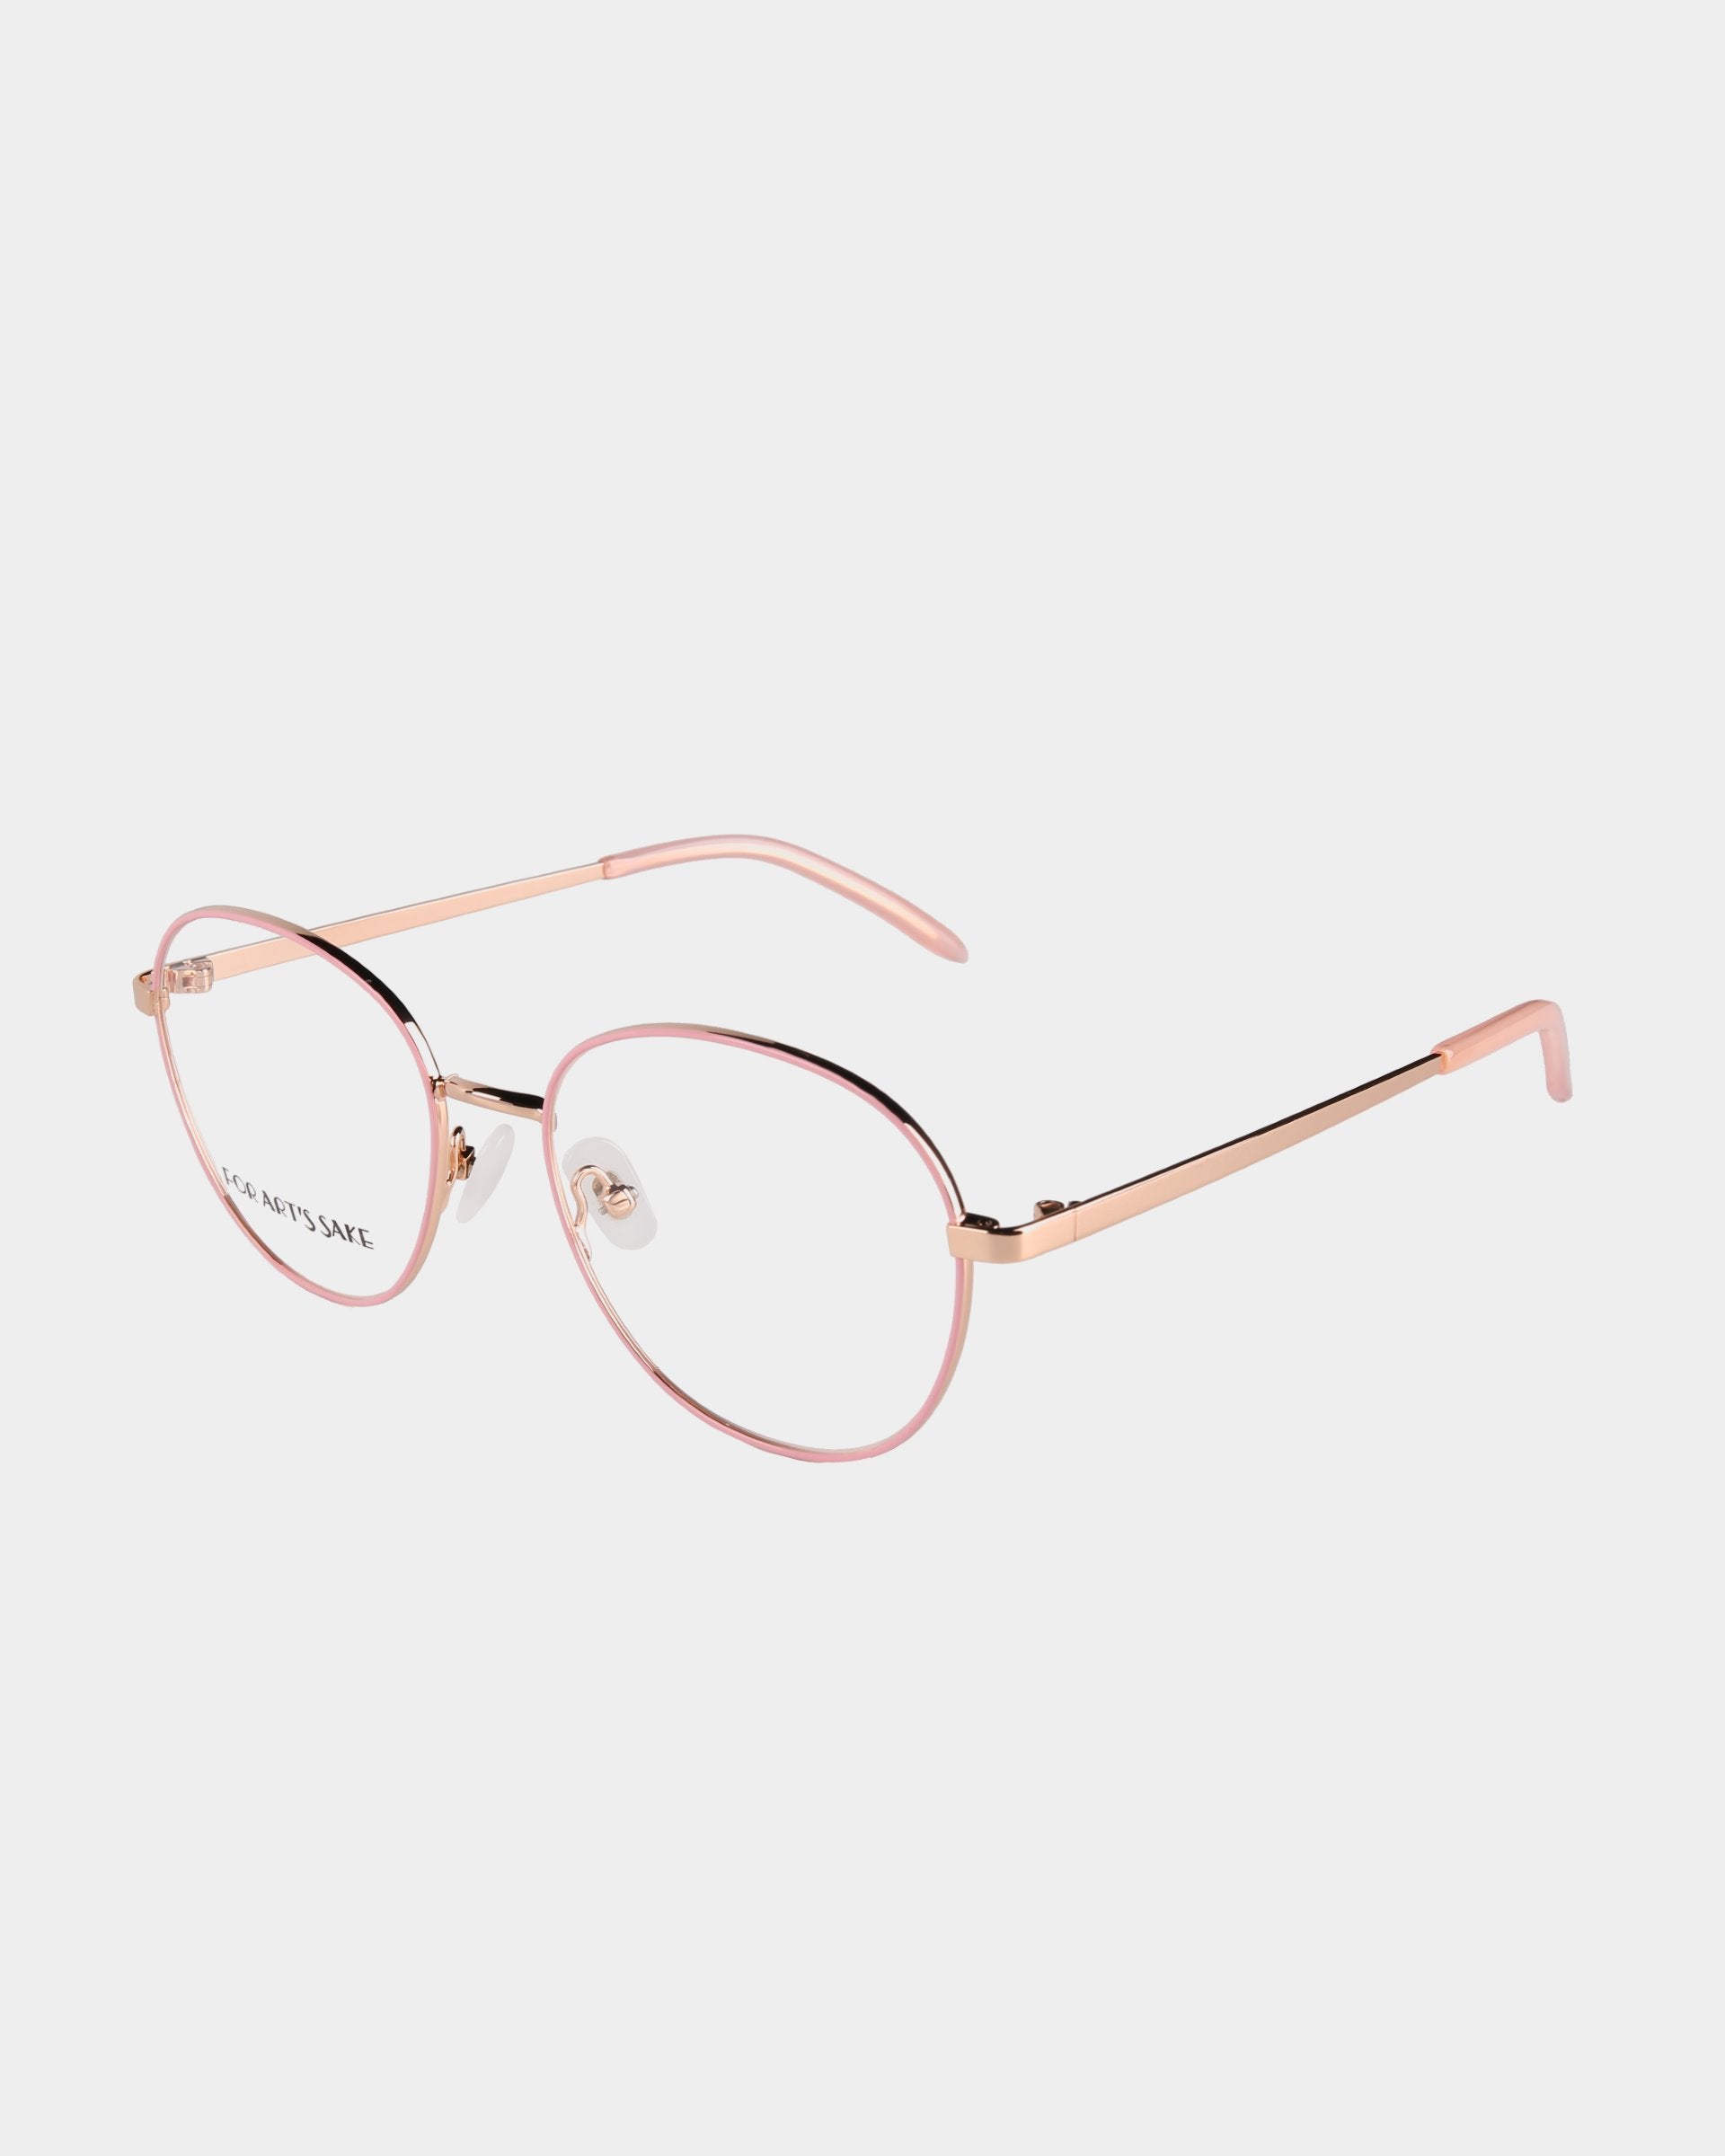 A pair of stylish eyeglasses with round pink frames, thin gold arms, and adjustable nose pads. The clear lenses feature a Blue Light Filter, and the ends of the arms are pink, complementing the frame color. These glasses come with an optional Prescription Service and are set against a plain white background. The product is named Hailey from For Art&#39;s Sake®.